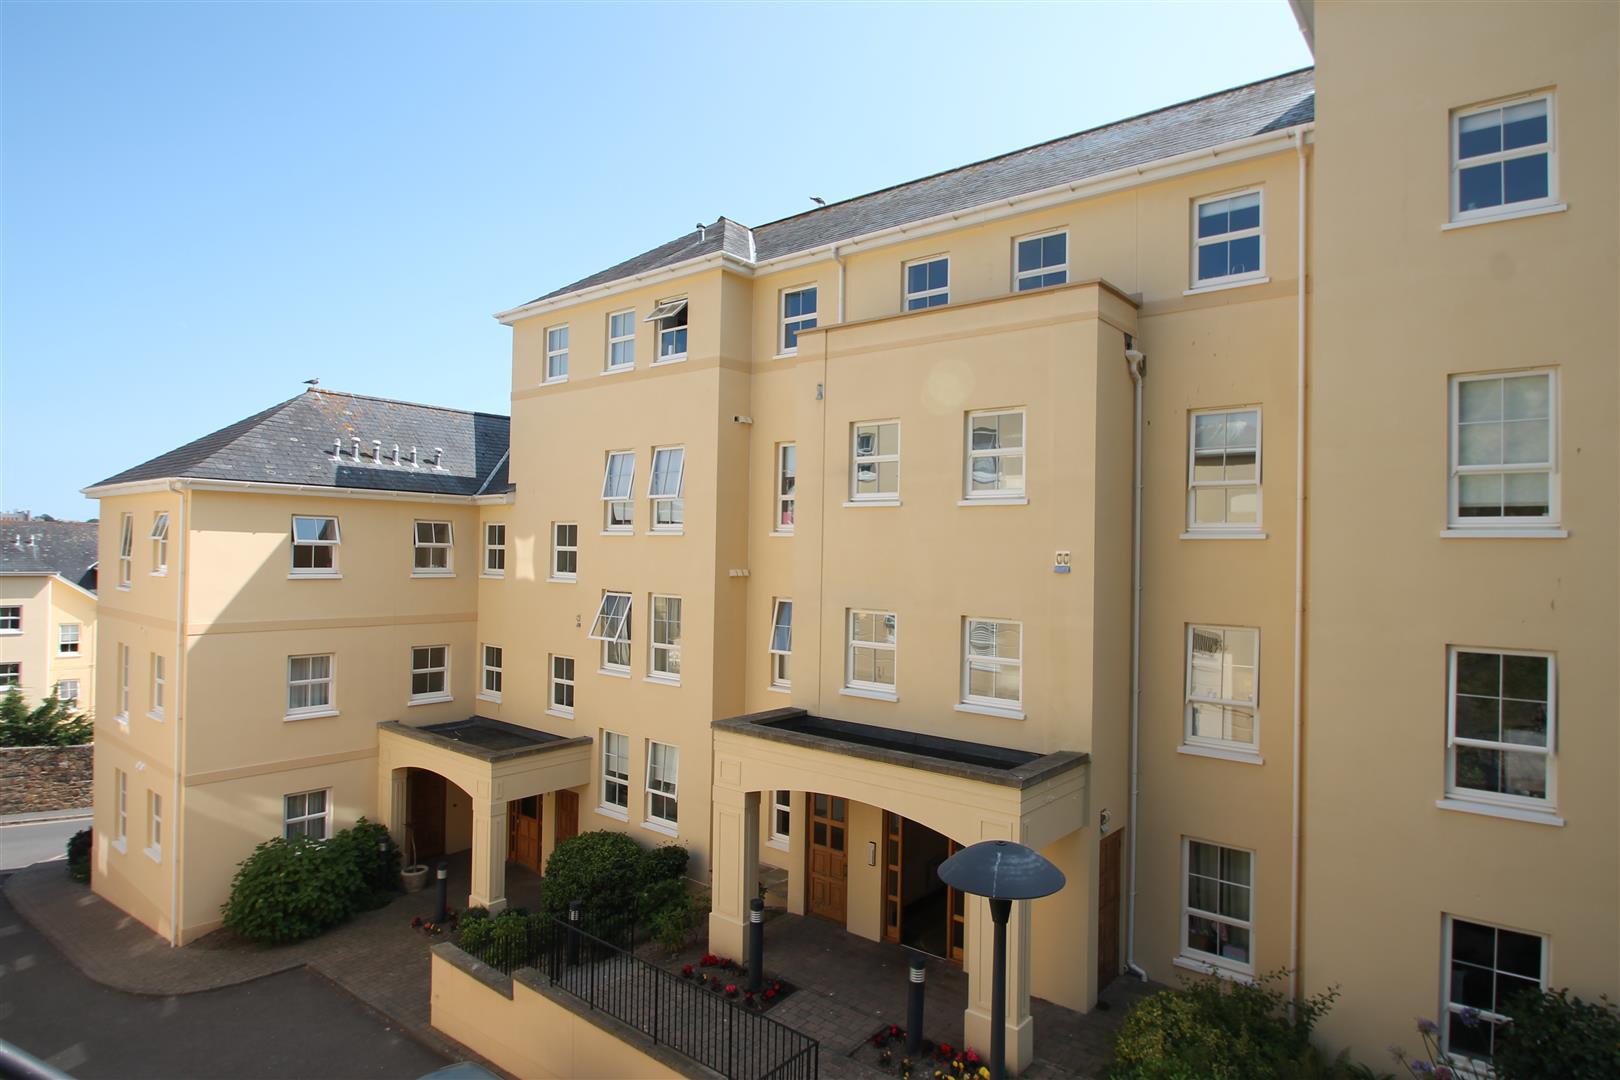 apartments in st helier jersey